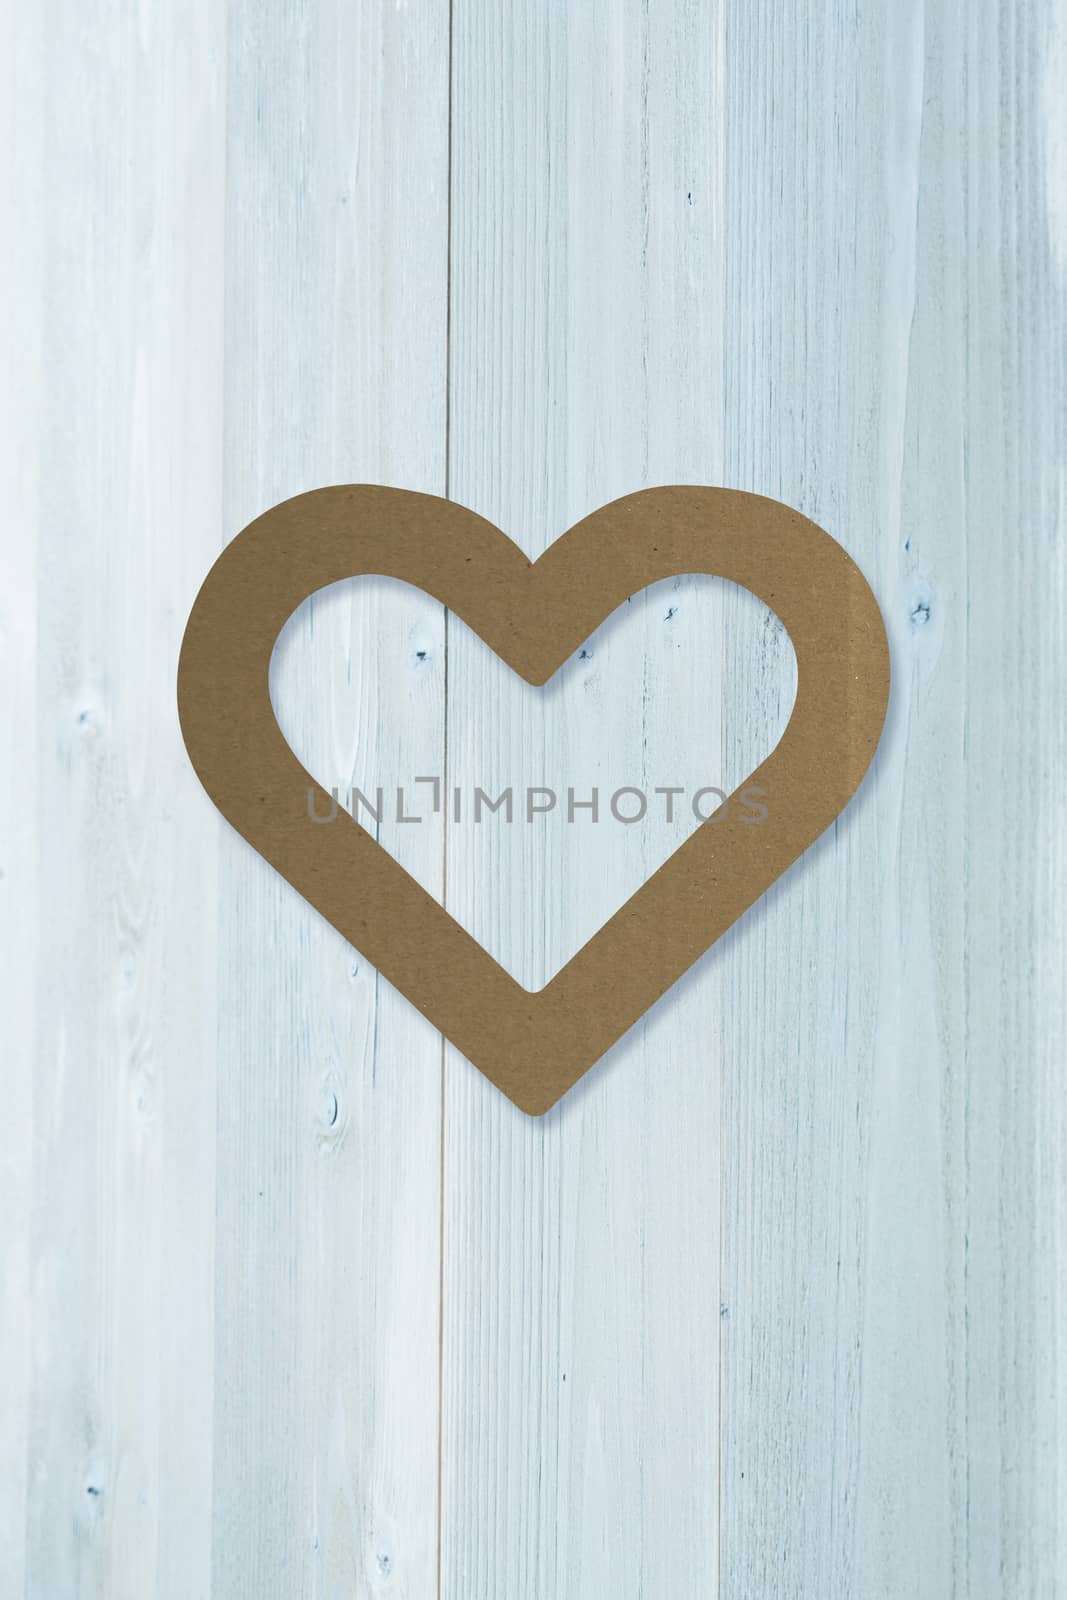 heart against bleached wooden planks background